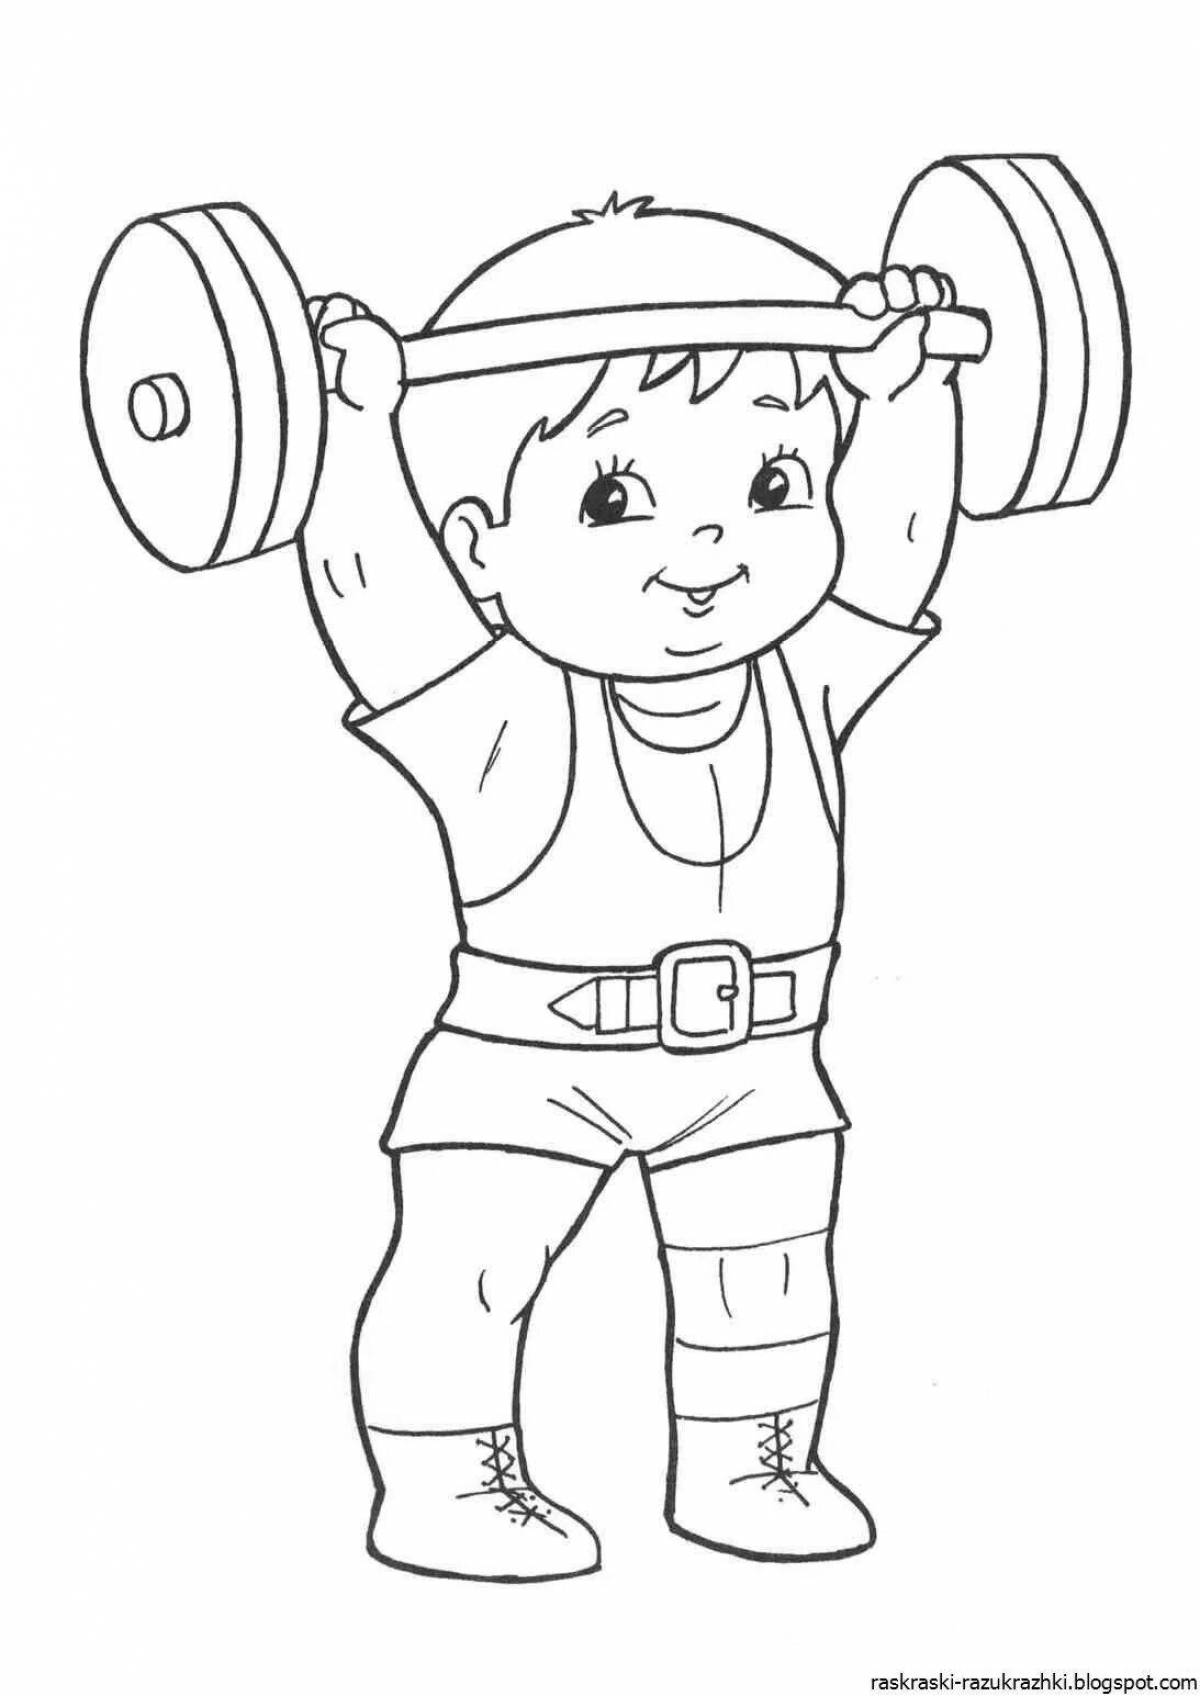 Amazing sports coloring pages for 5-6 year olds